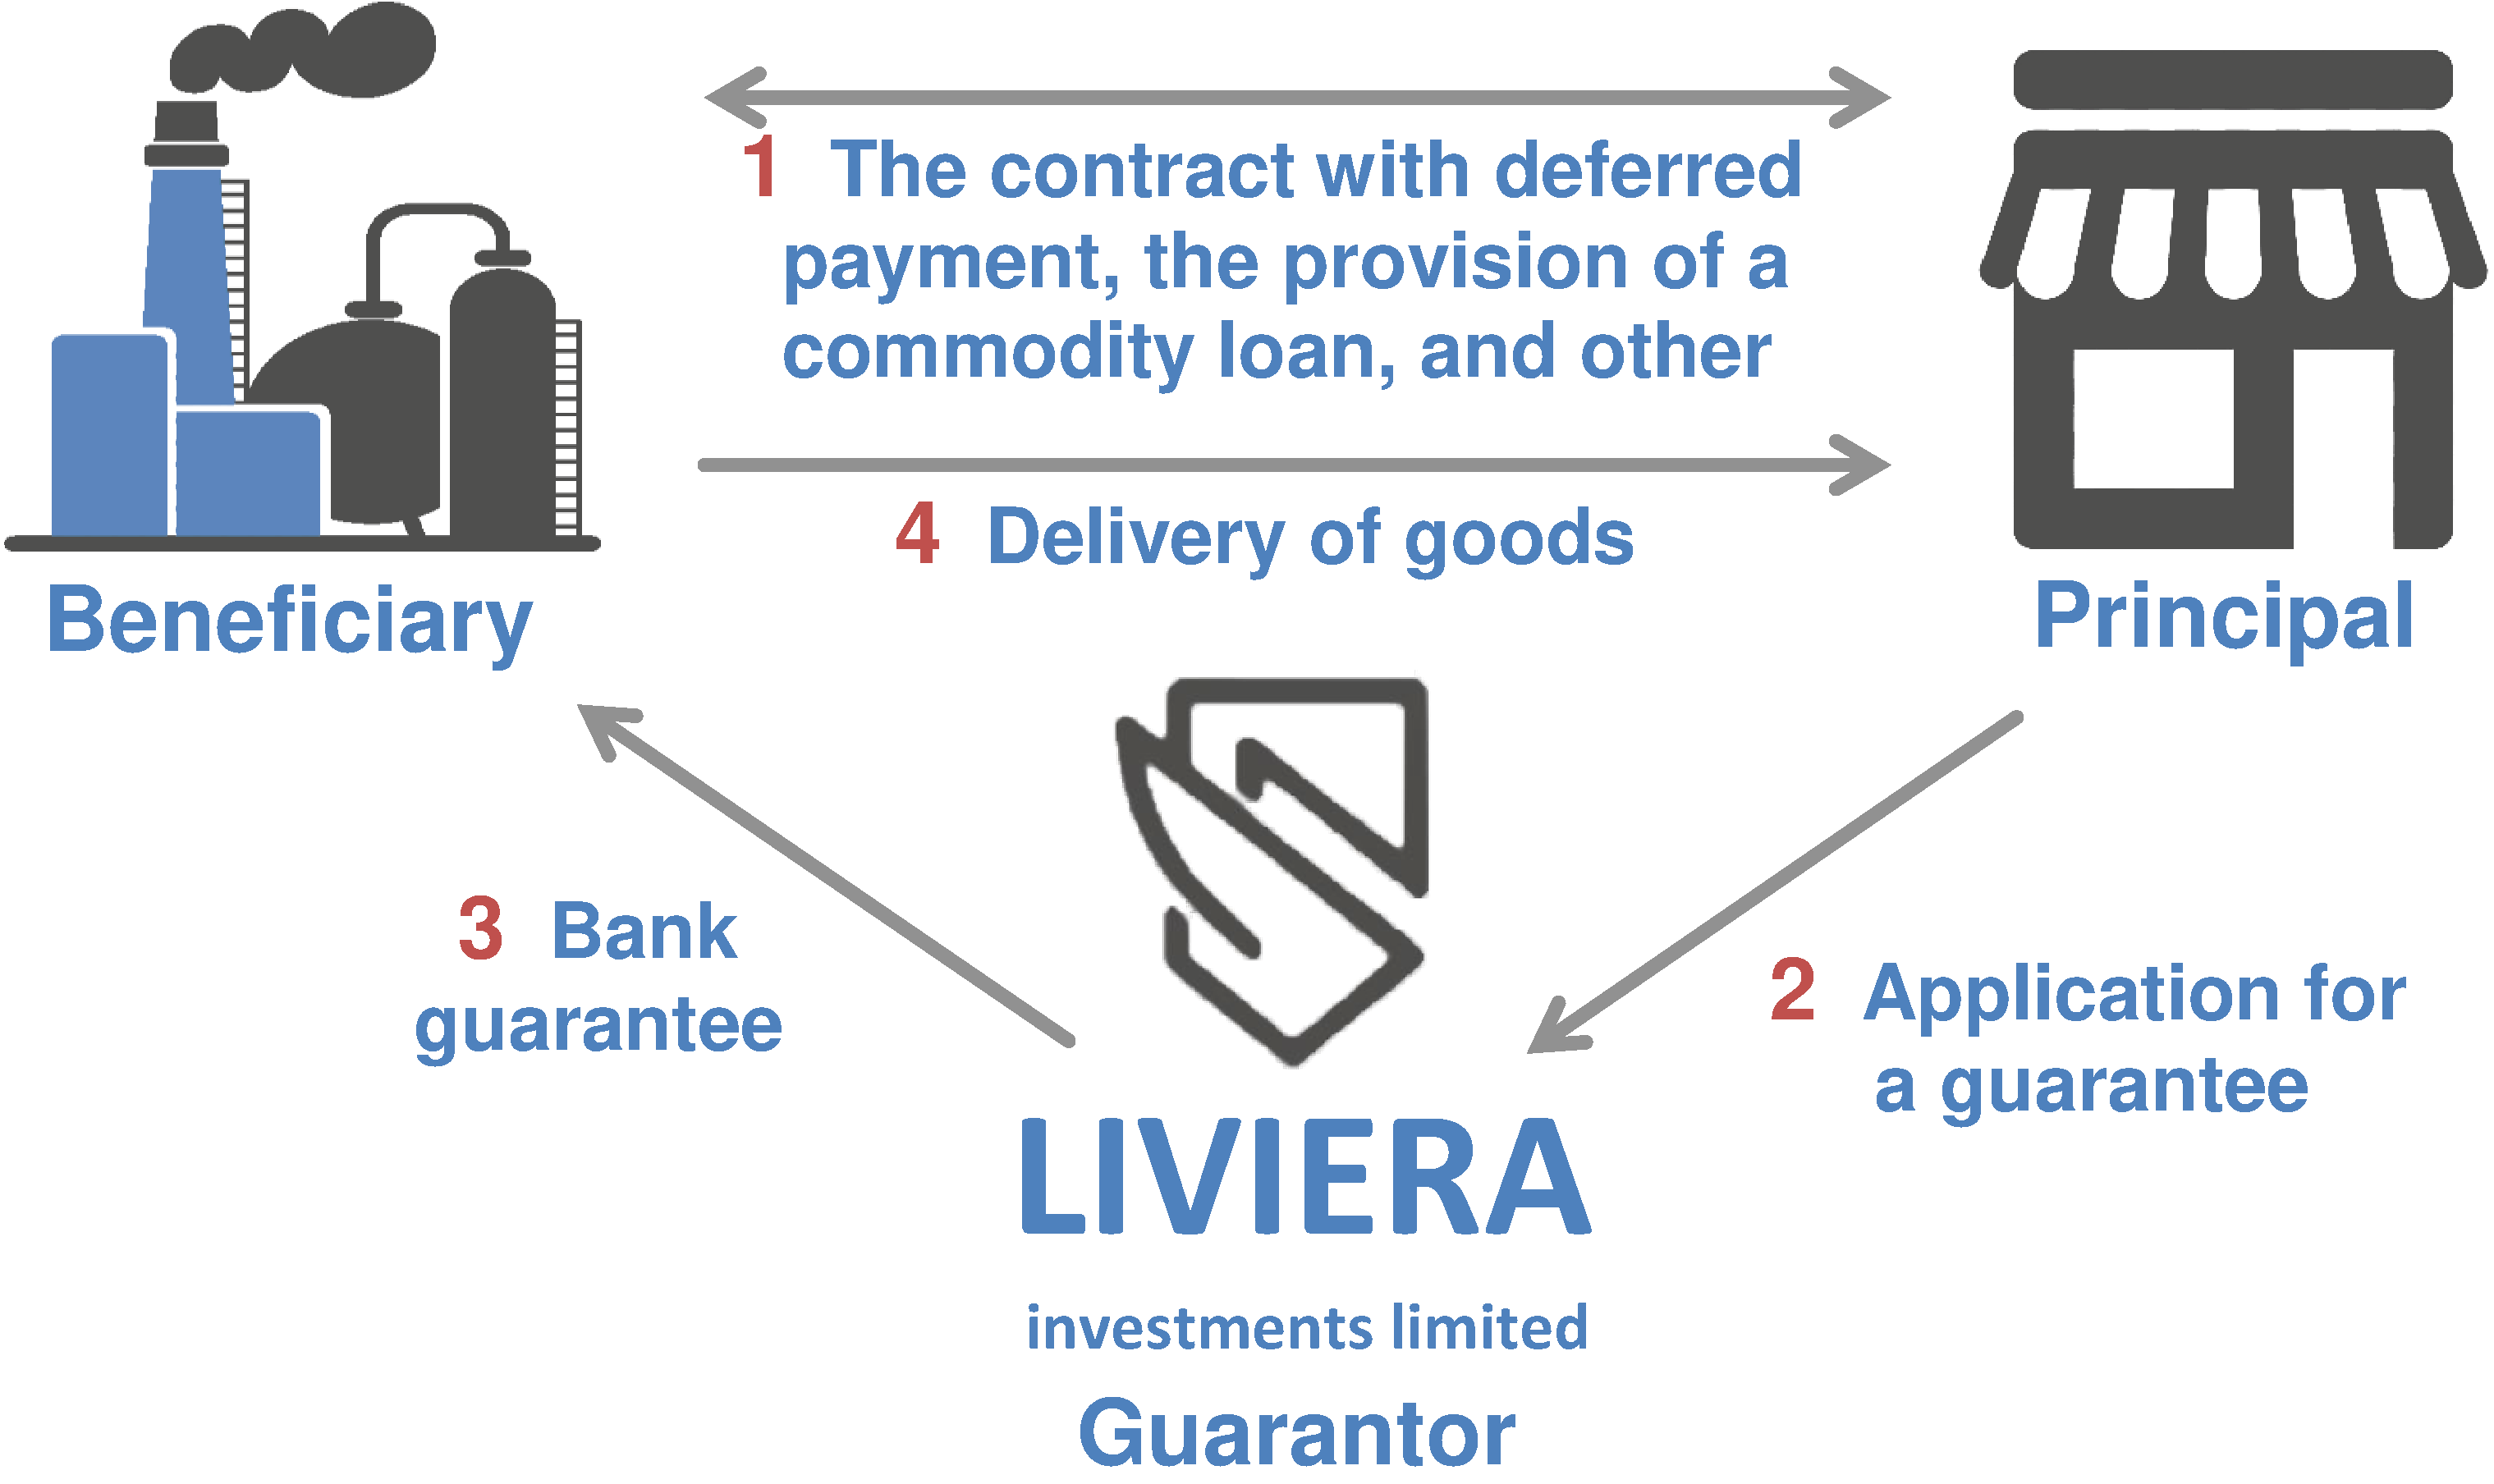 Scheme of the bank guarantee with Liviera investments Ltd